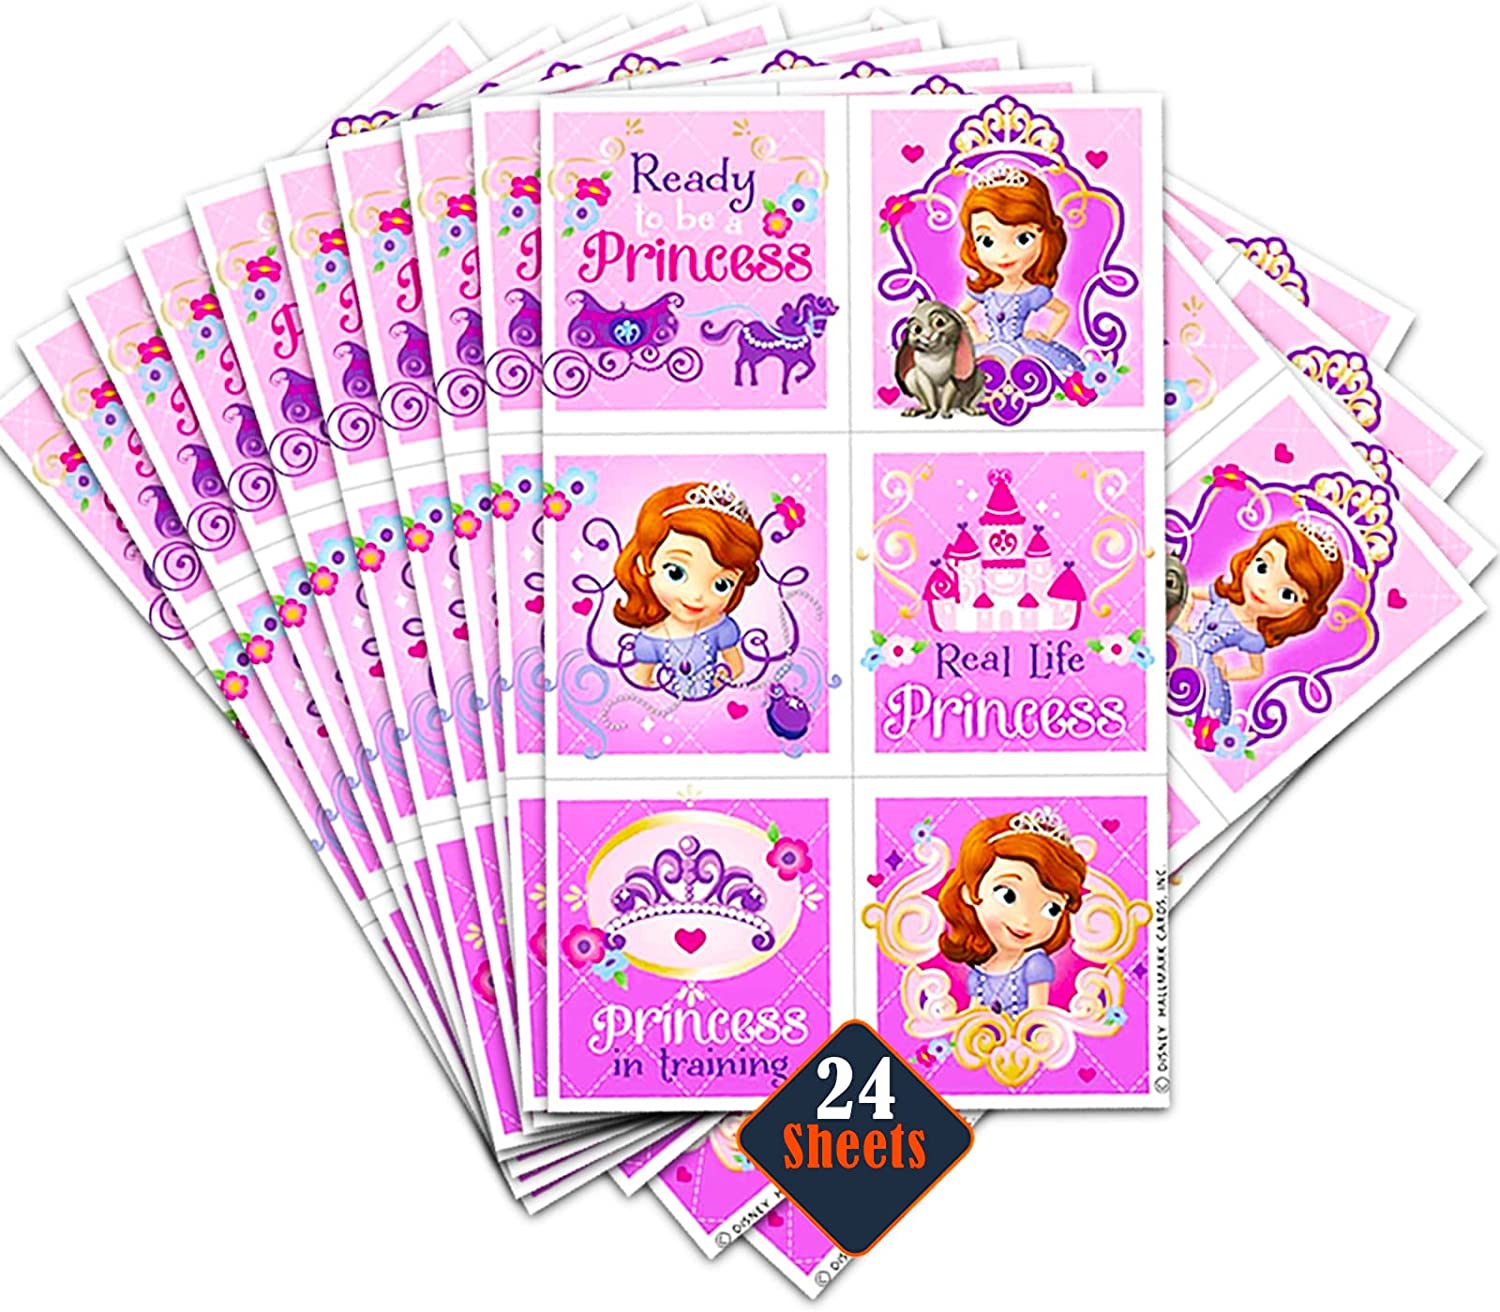 100 SOFIA THE FIRST Stickers Bulk Party Favors 